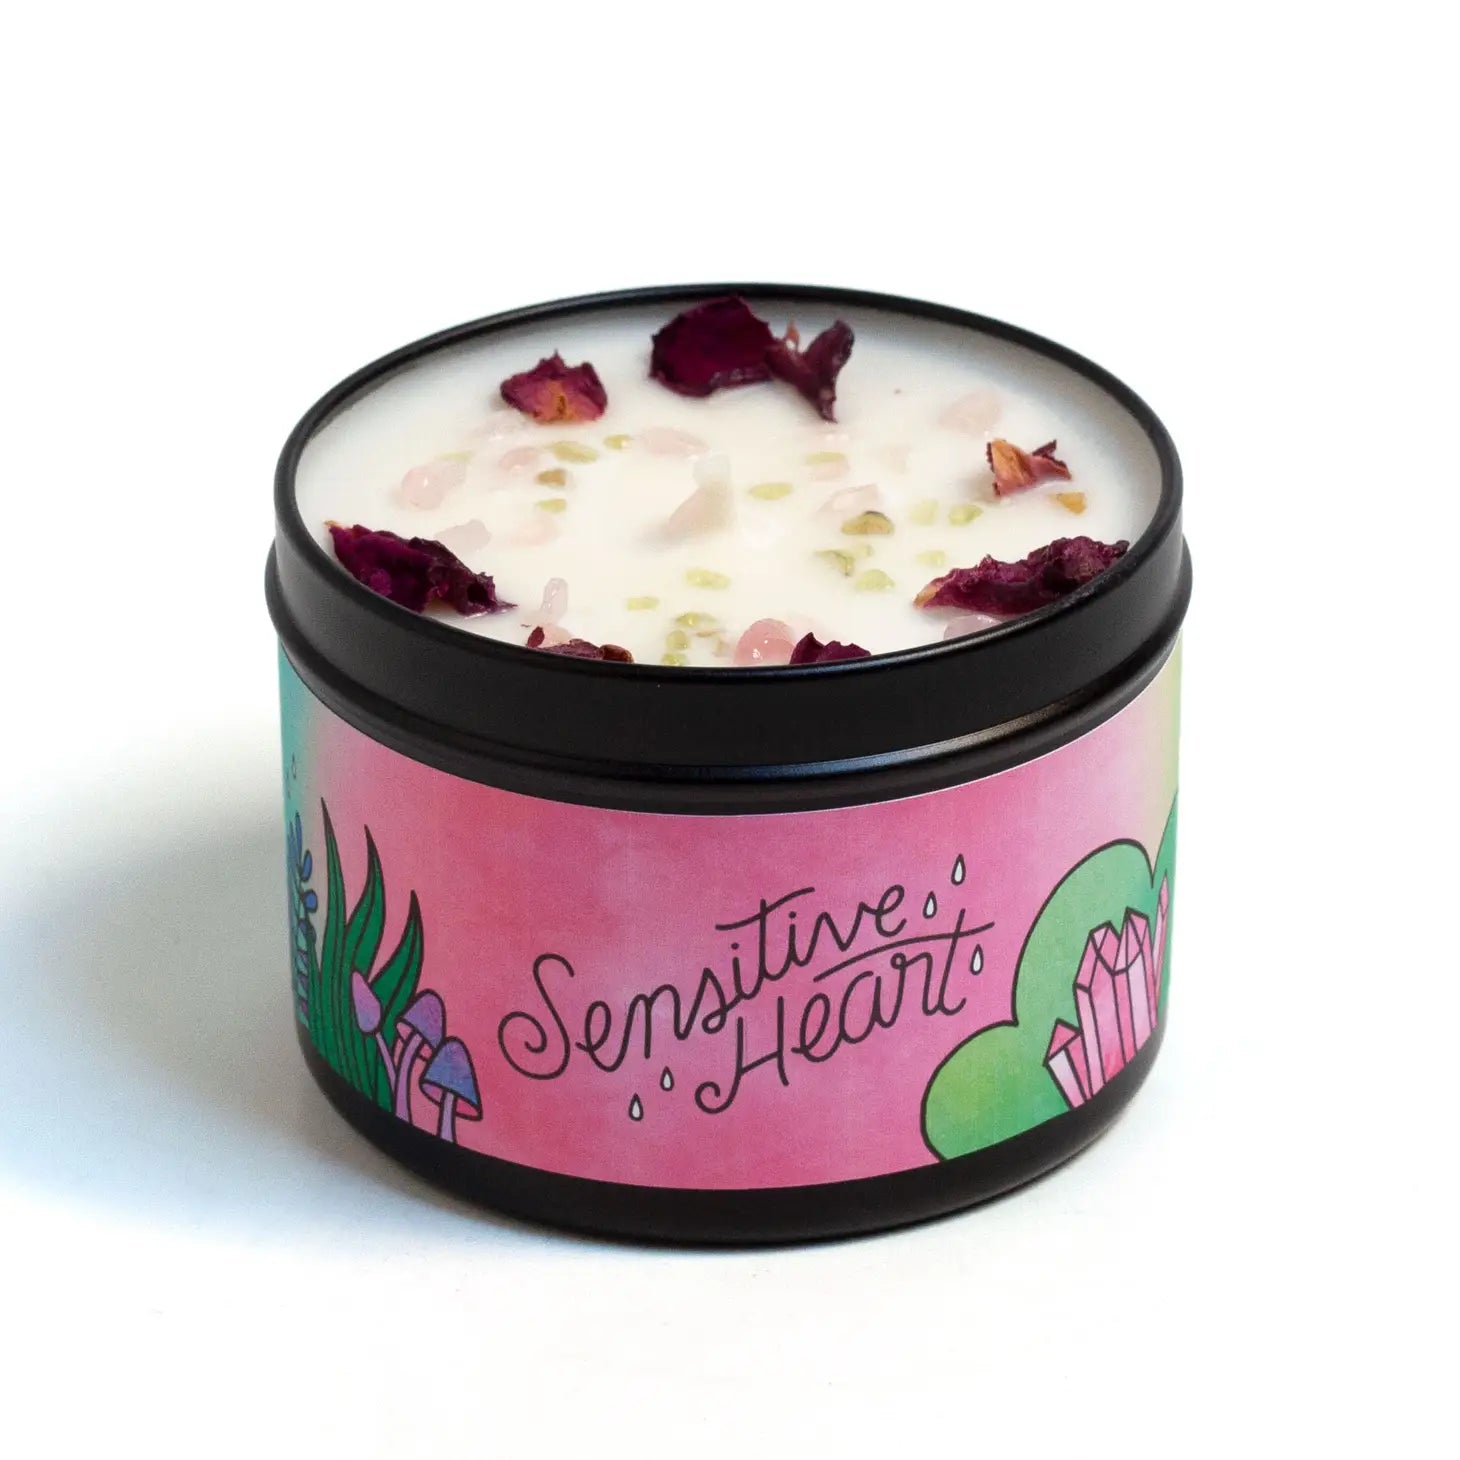 Sensitive Heart Floral & Citrus Candle Local PNW - Moon Room Shop and Wellness